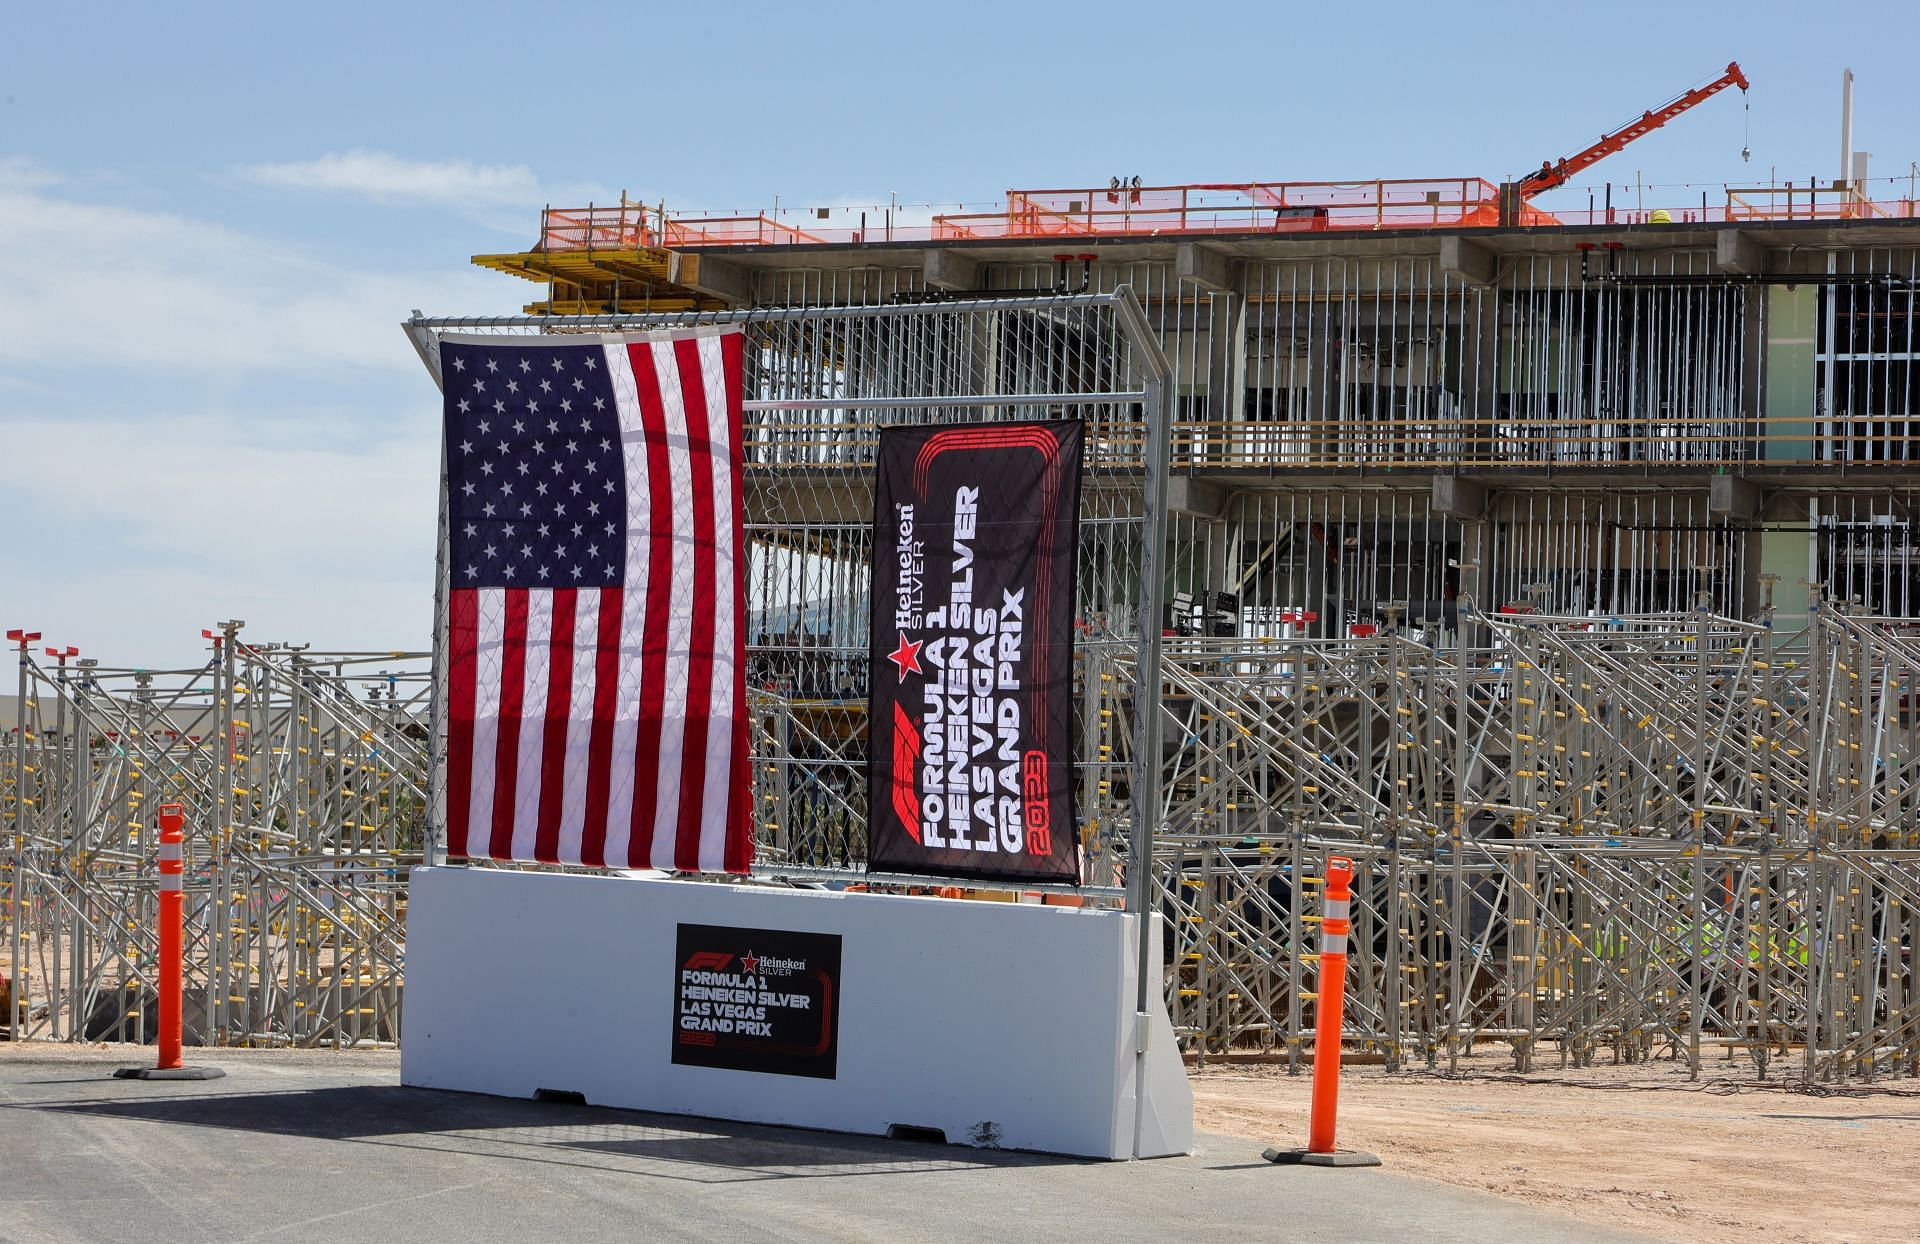 Formula 1 Las Vegas Grand Prix Paddock Building Topping Out Ceremony